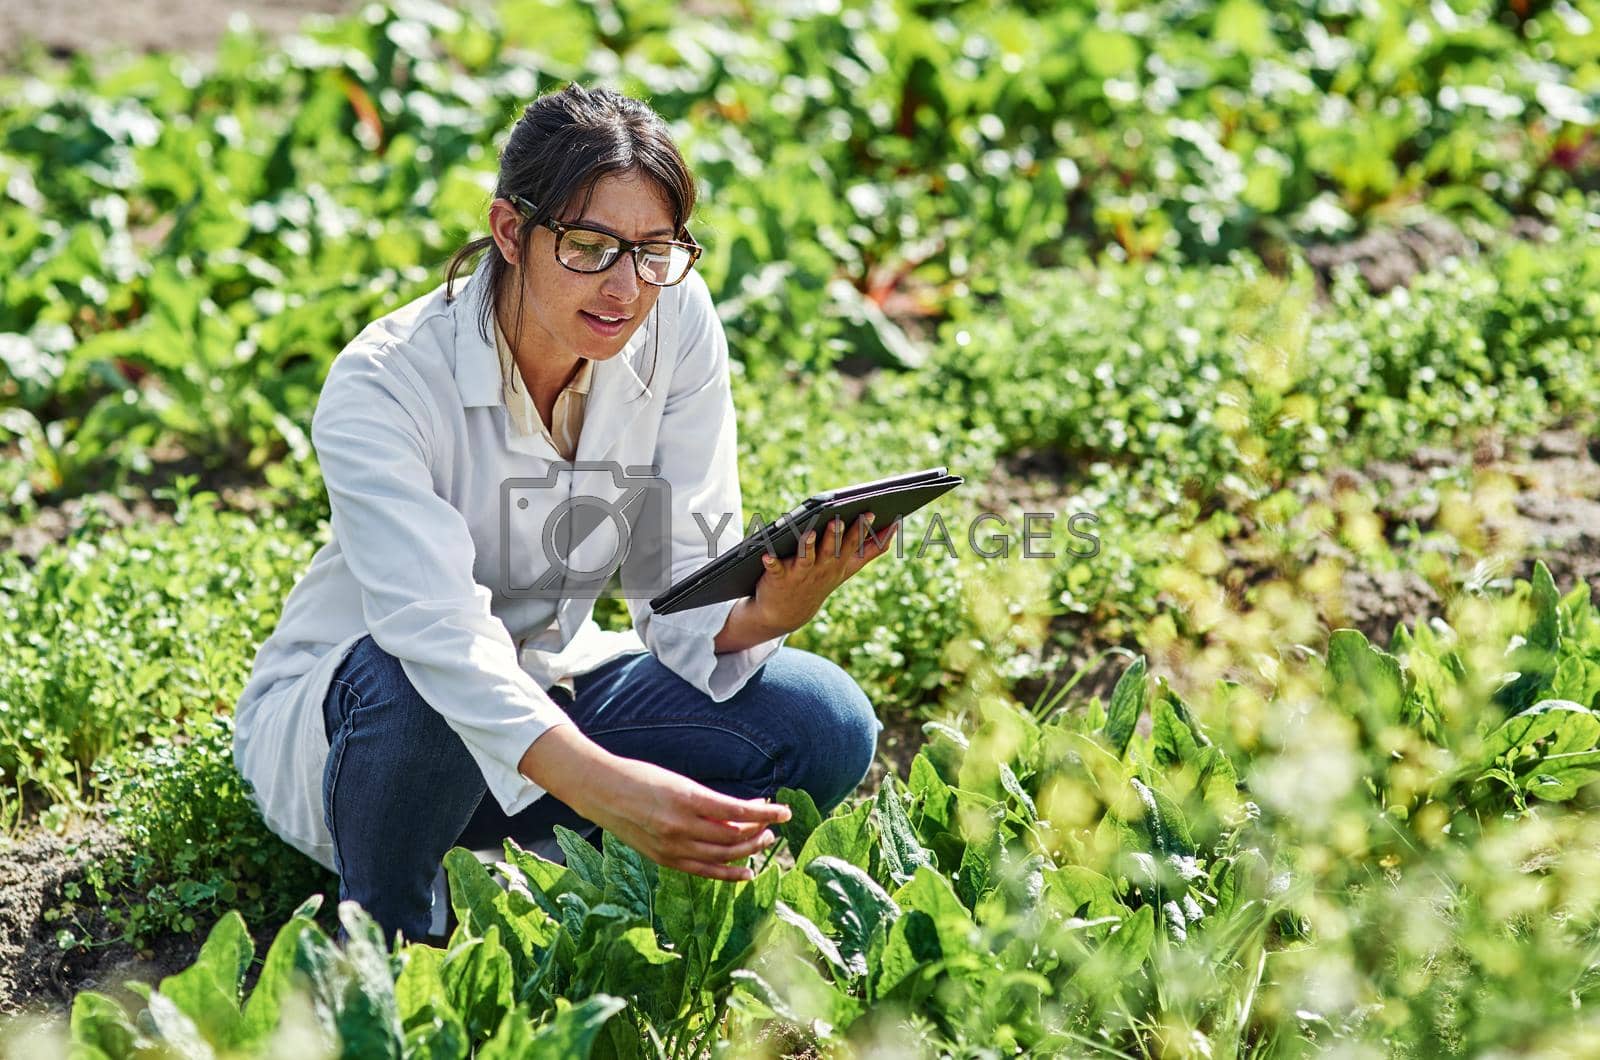 Royalty free image of This app helps me conduct experiments and research better. Shot of an attractive young scientist using a digital tablet while studying plants and crops outdoors on a farm. by YuriArcurs